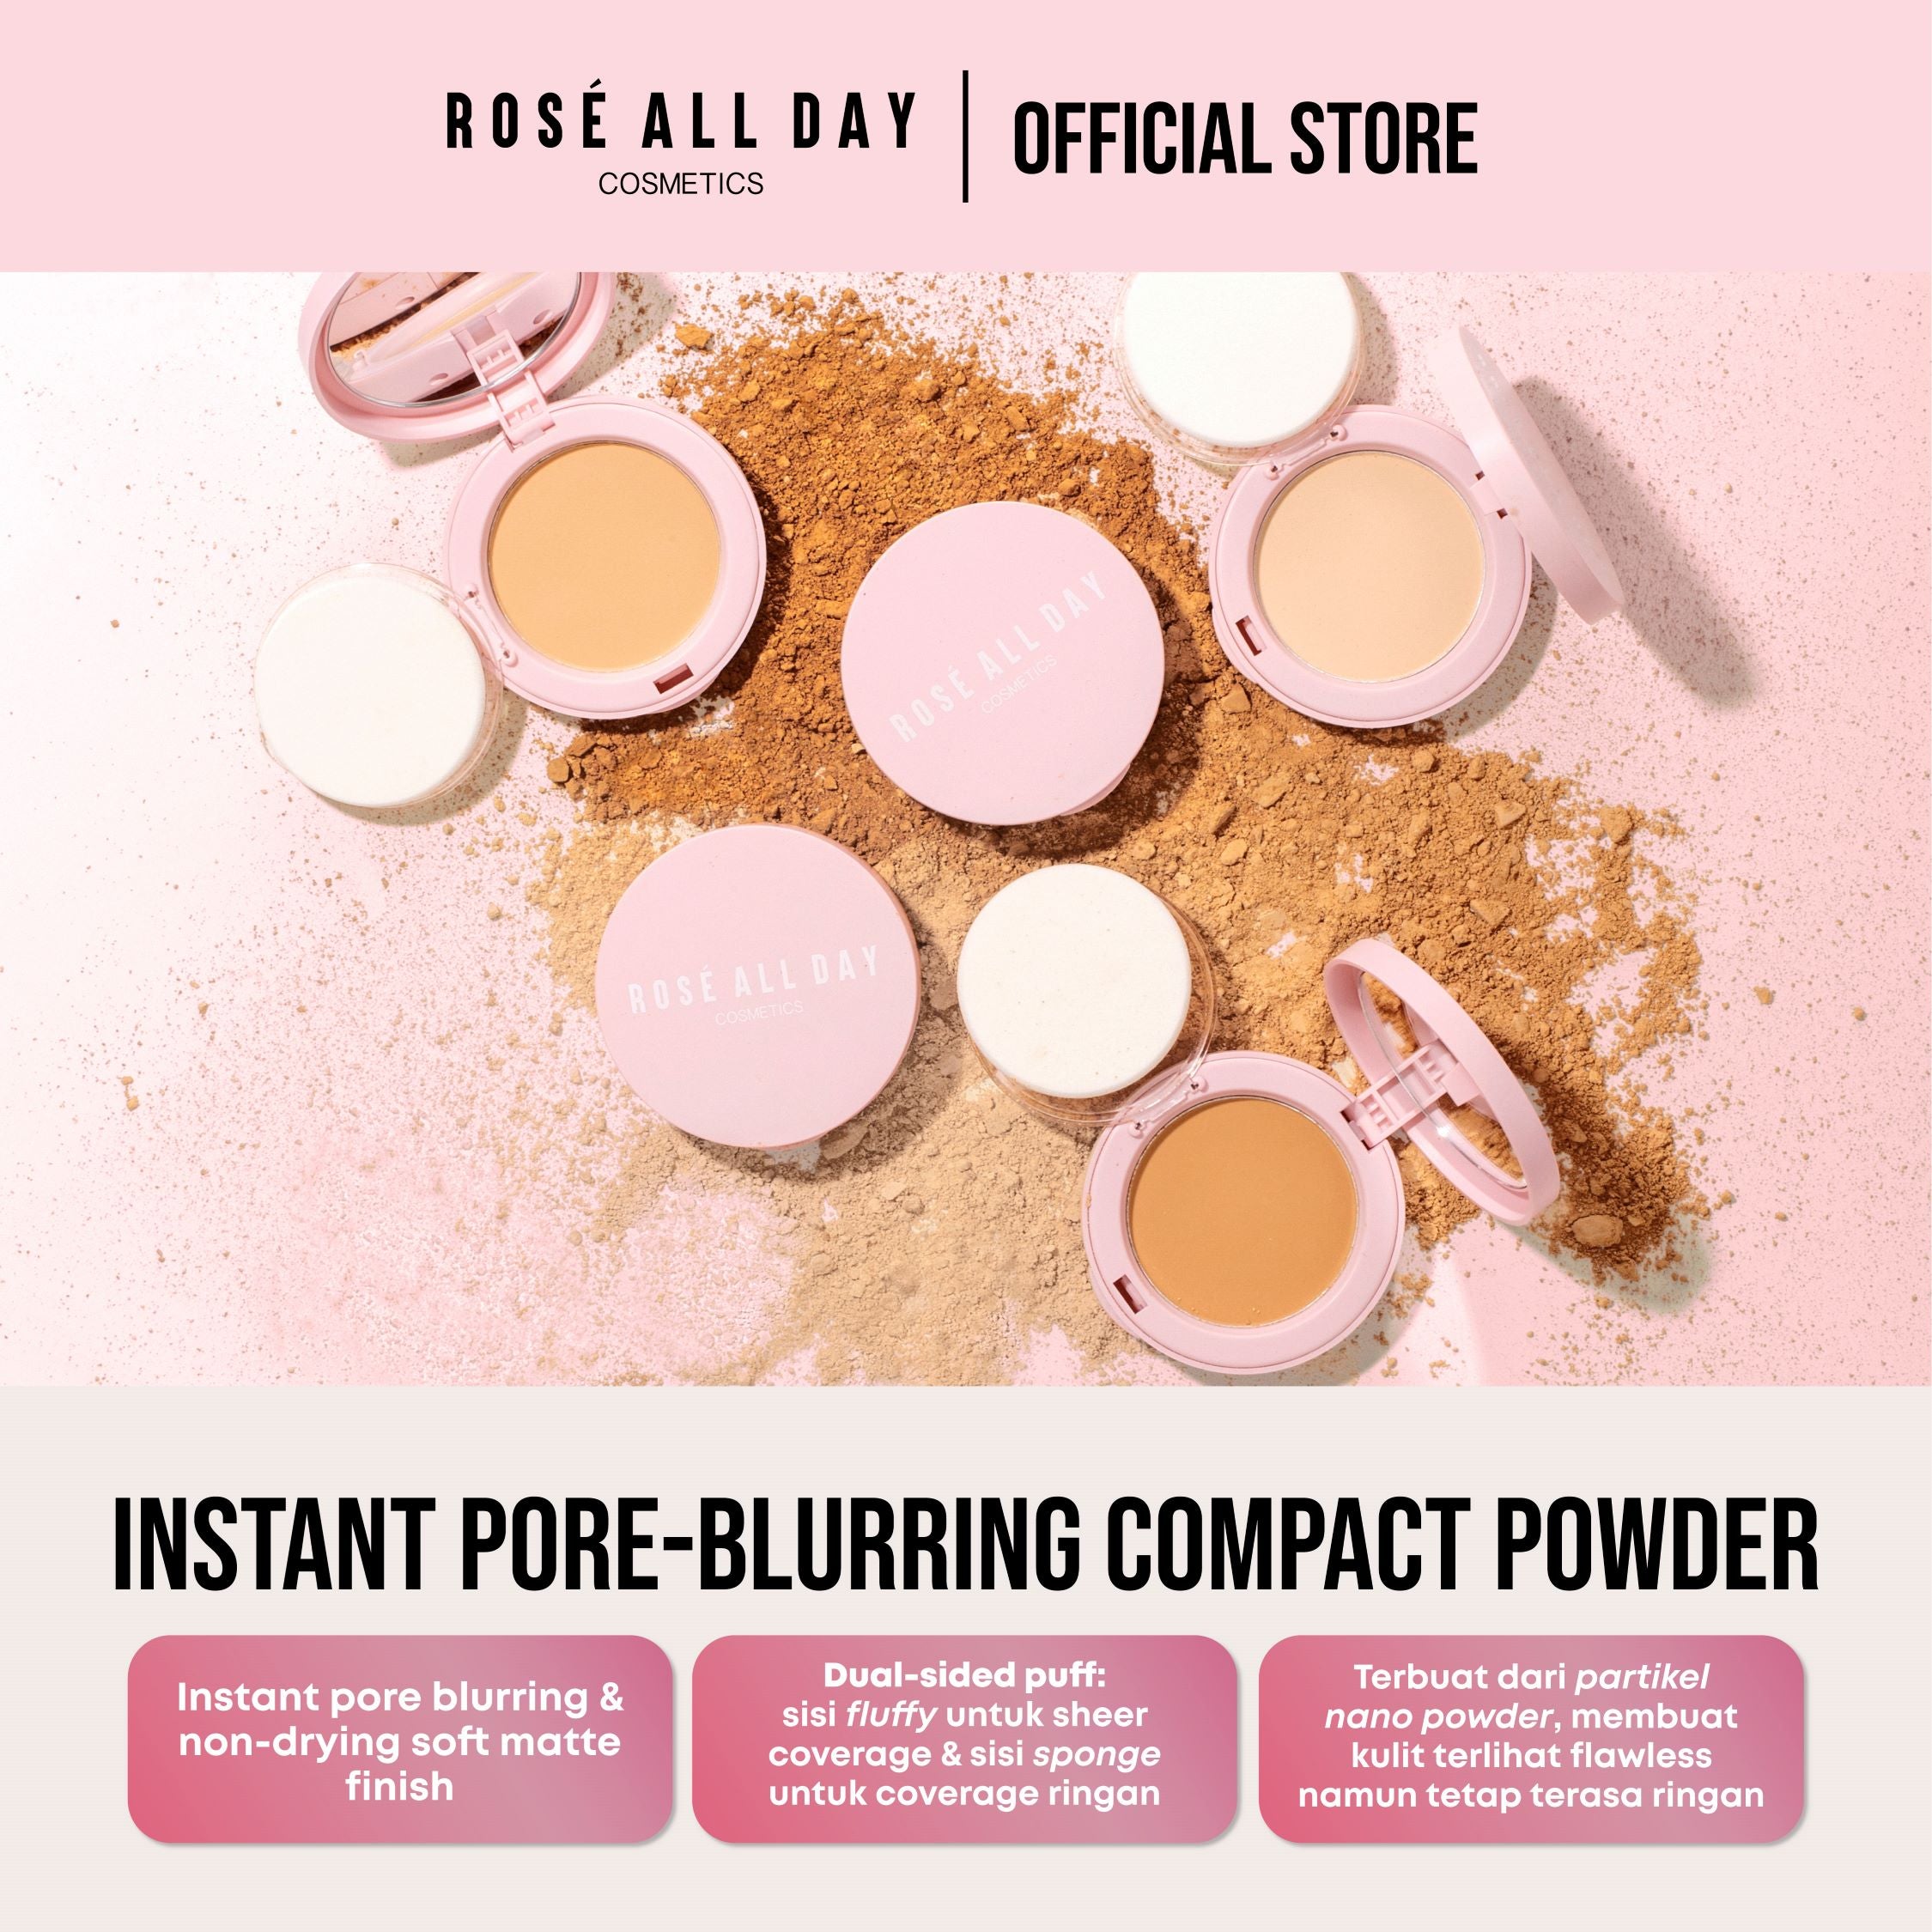 Rose All Day The Realest Lightweight Compact Powder in Medium